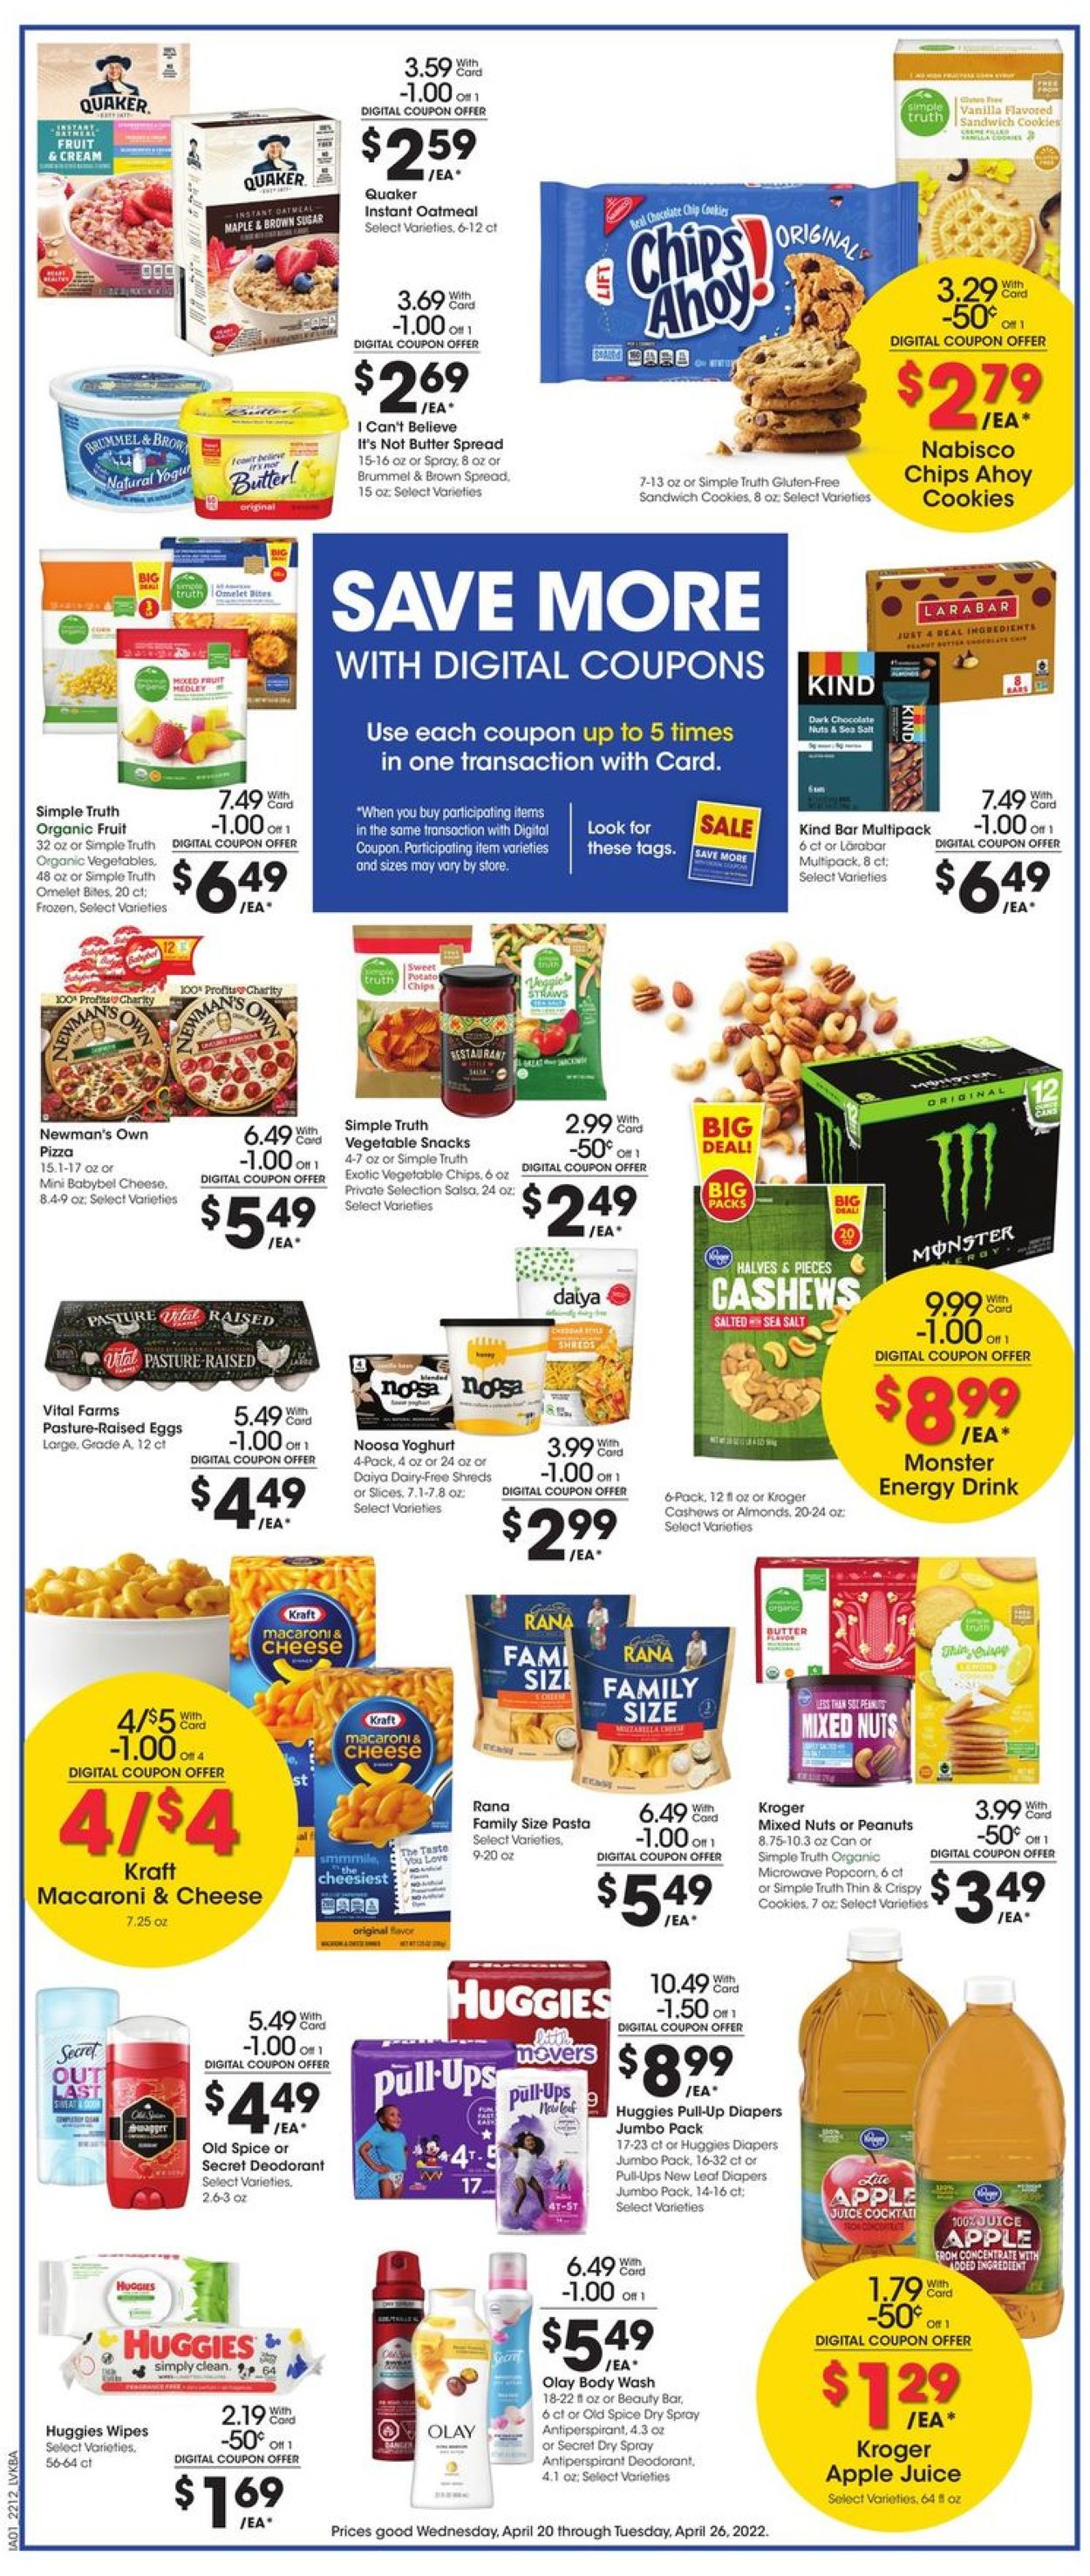 Jay C Food Stores Ad from 04/20/2022